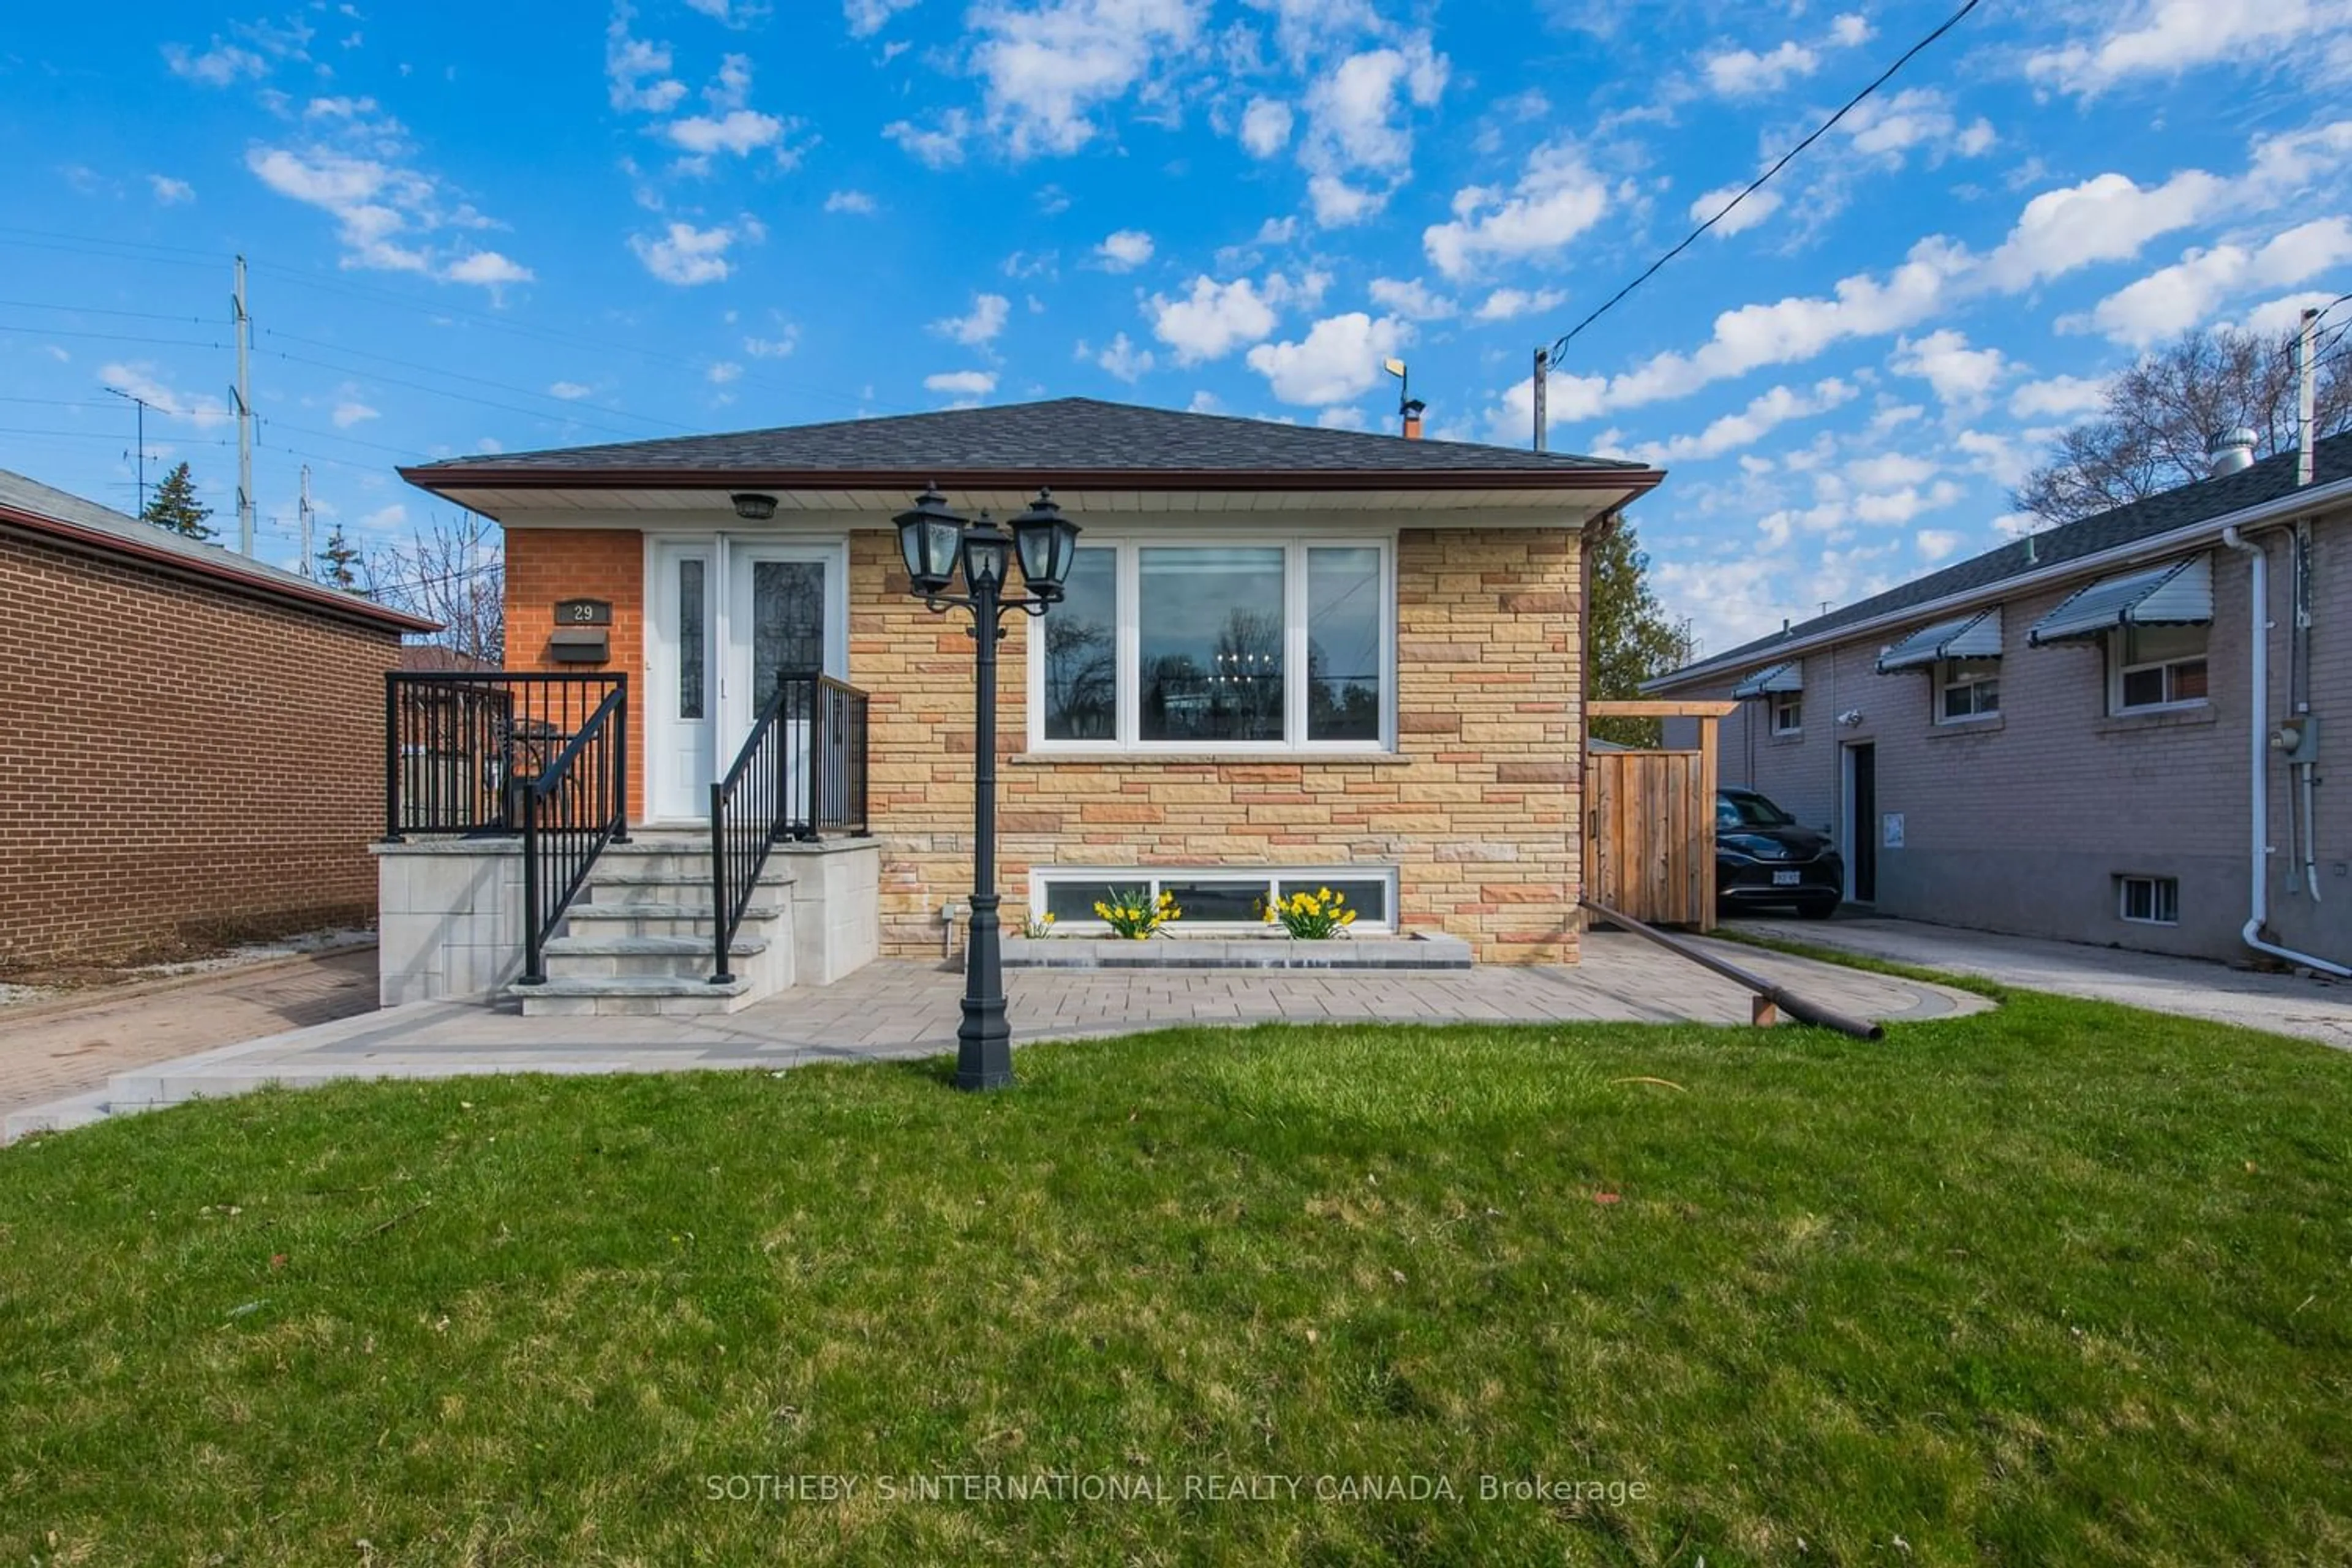 Frontside or backside of a home for 29 Romulus Dr, Toronto Ontario M1K 4C1